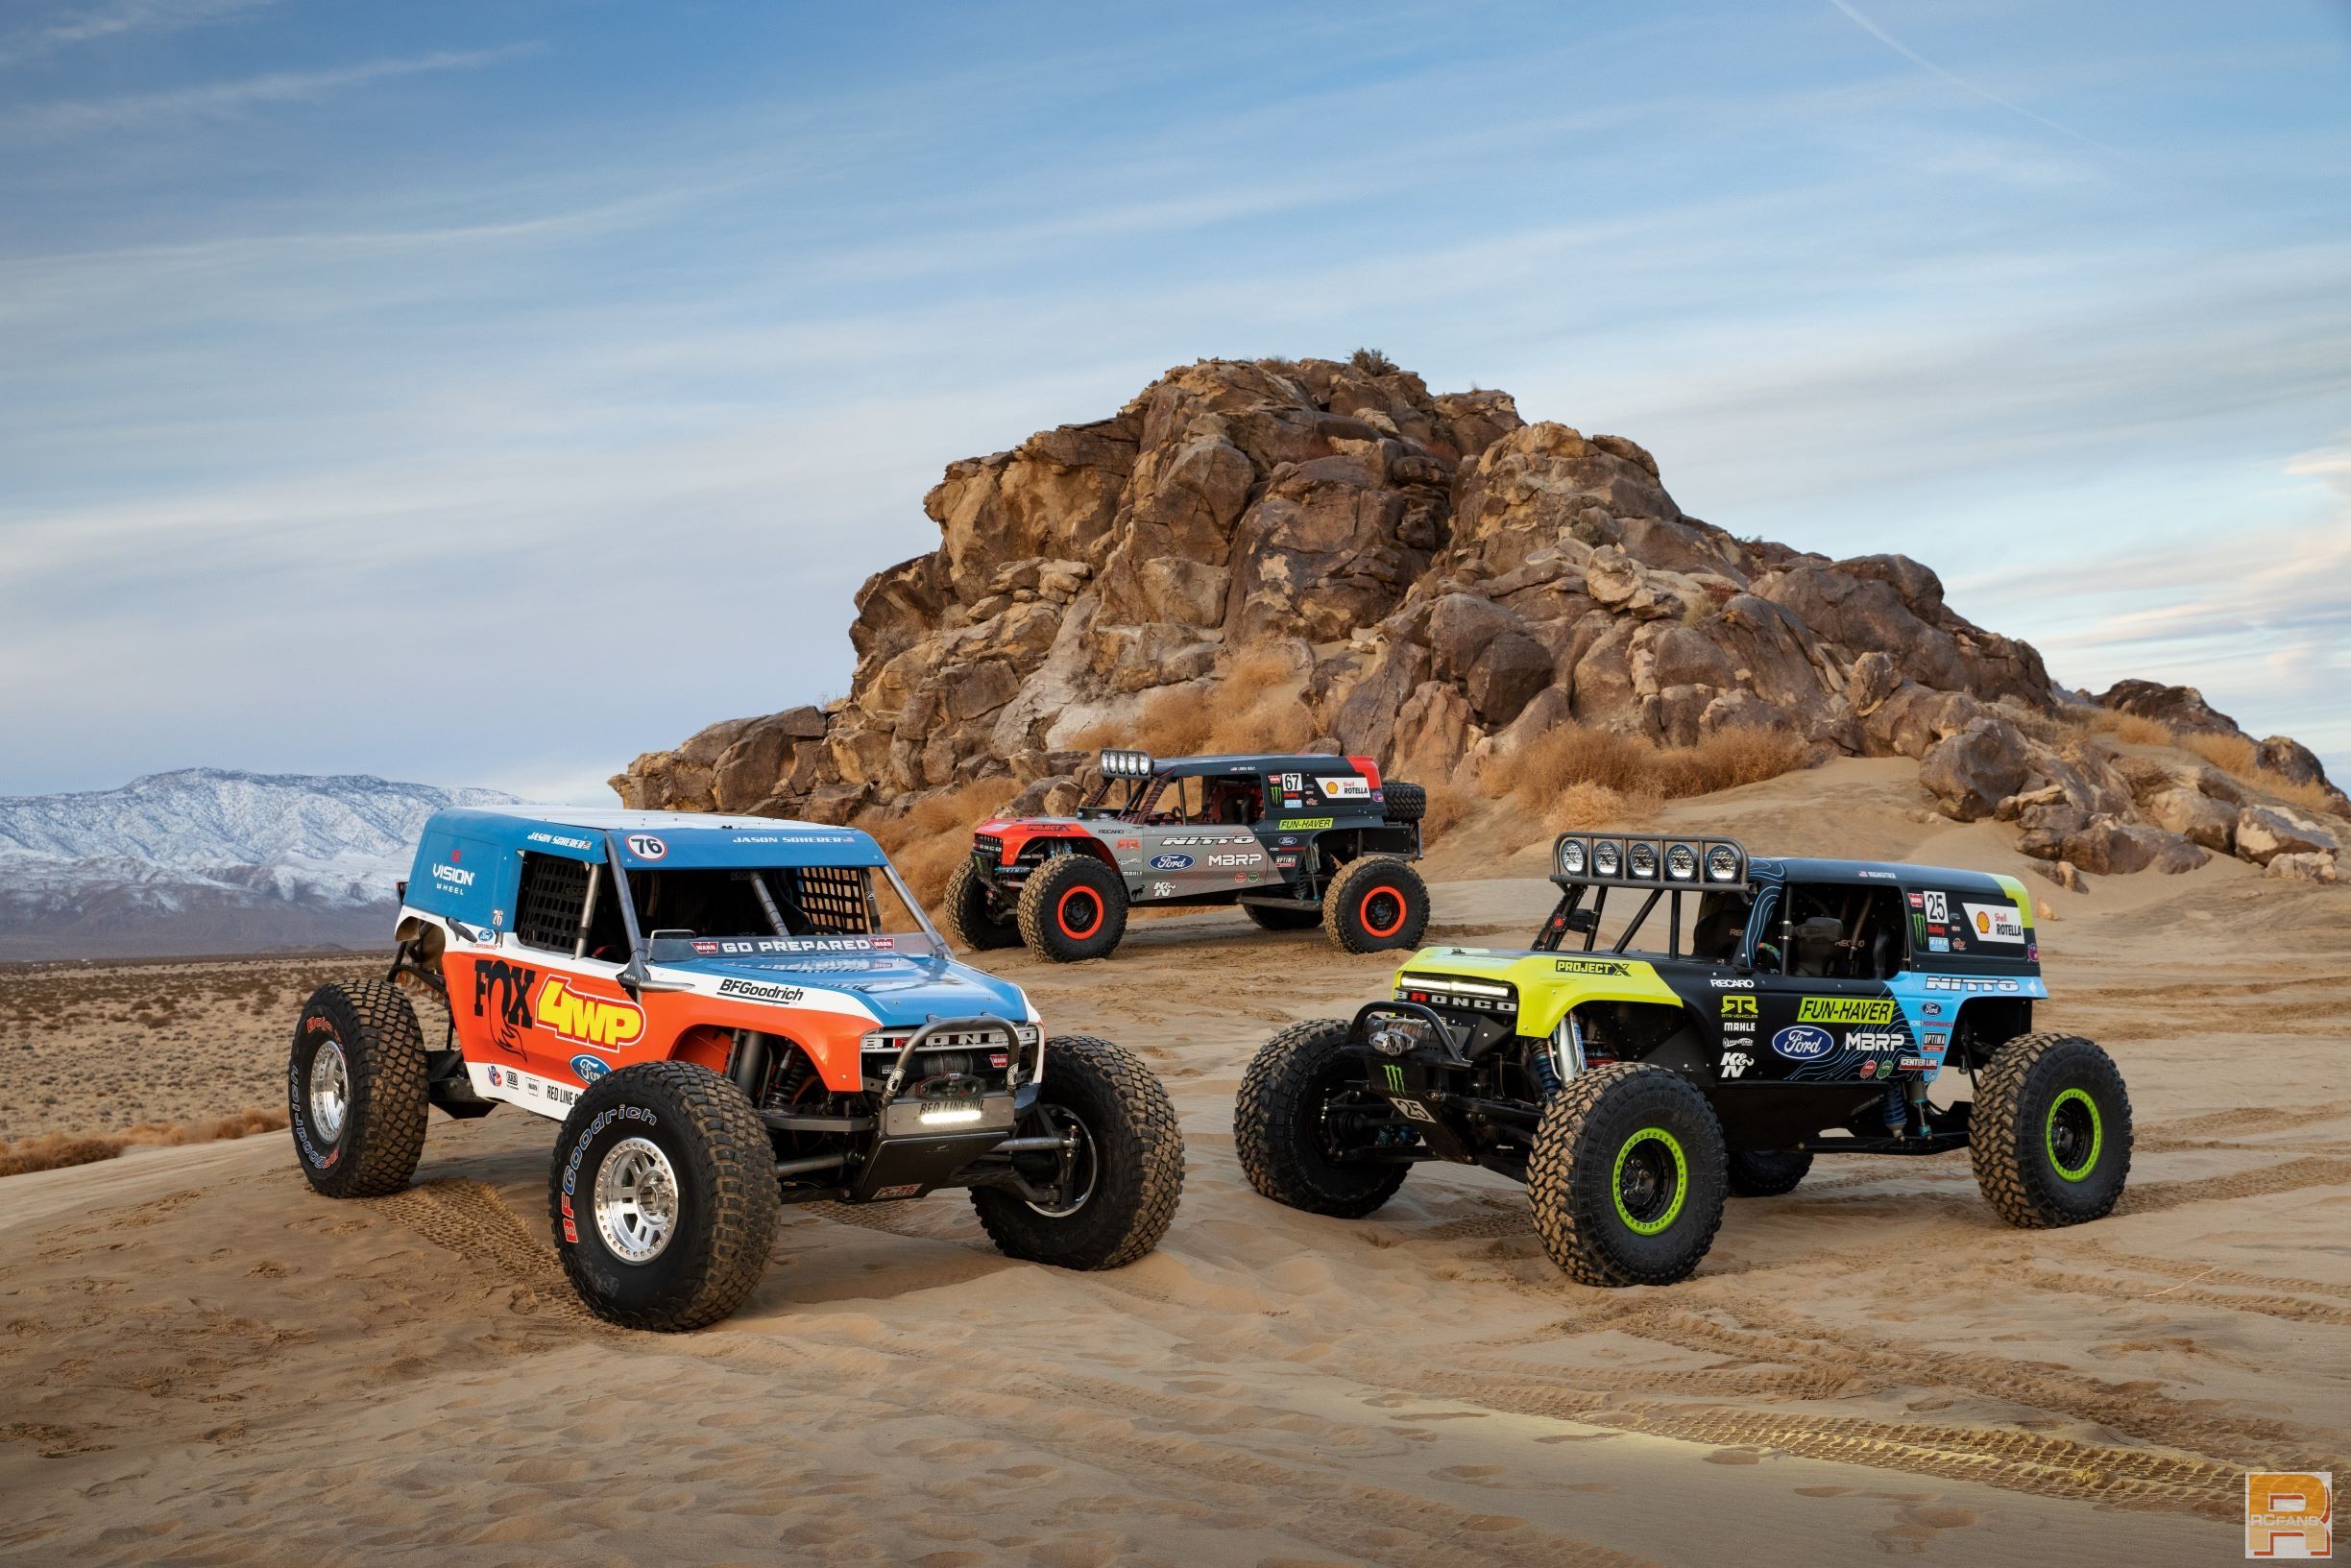 The-three-20201-Ford-Bronco-4400-King-of-the-Hammers-racers.jpg